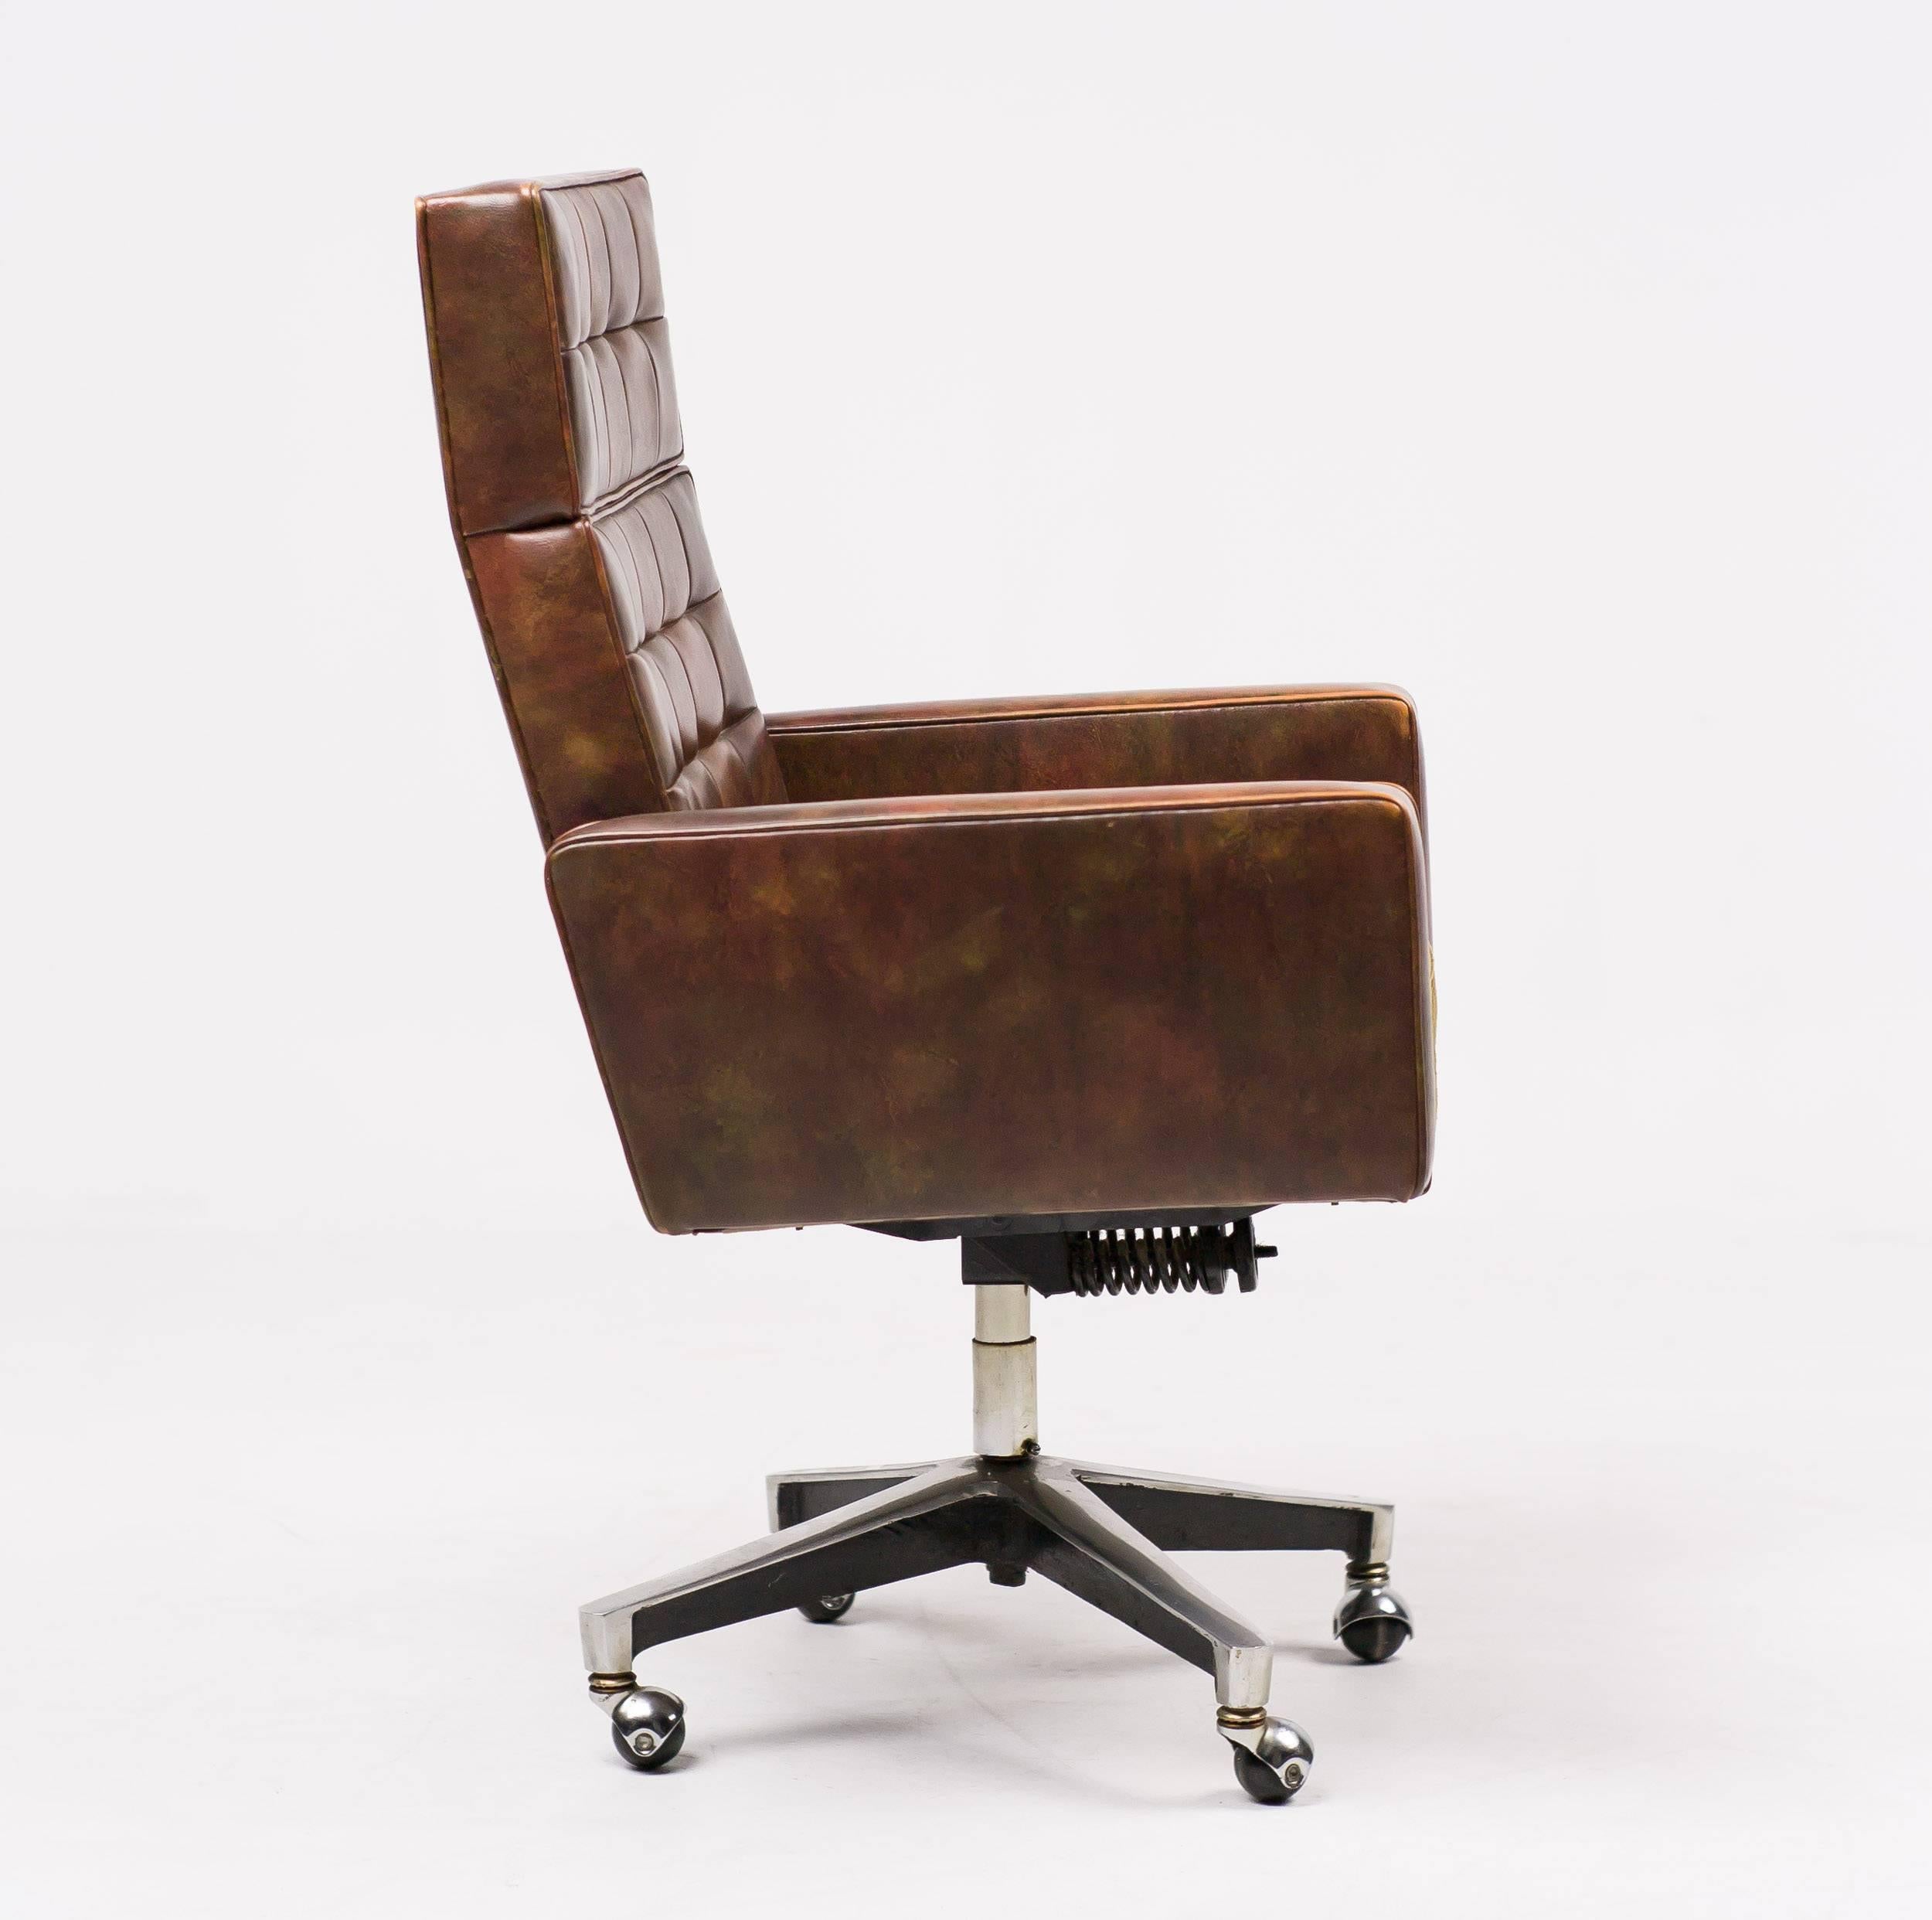 Long out of production, this large executive desk chair is a finely made piece by Knoll. This comfortable design has tilt and swivel features on the four-star caster base.

Excellent fast and affordable worldwide shipping.
White glove delivery